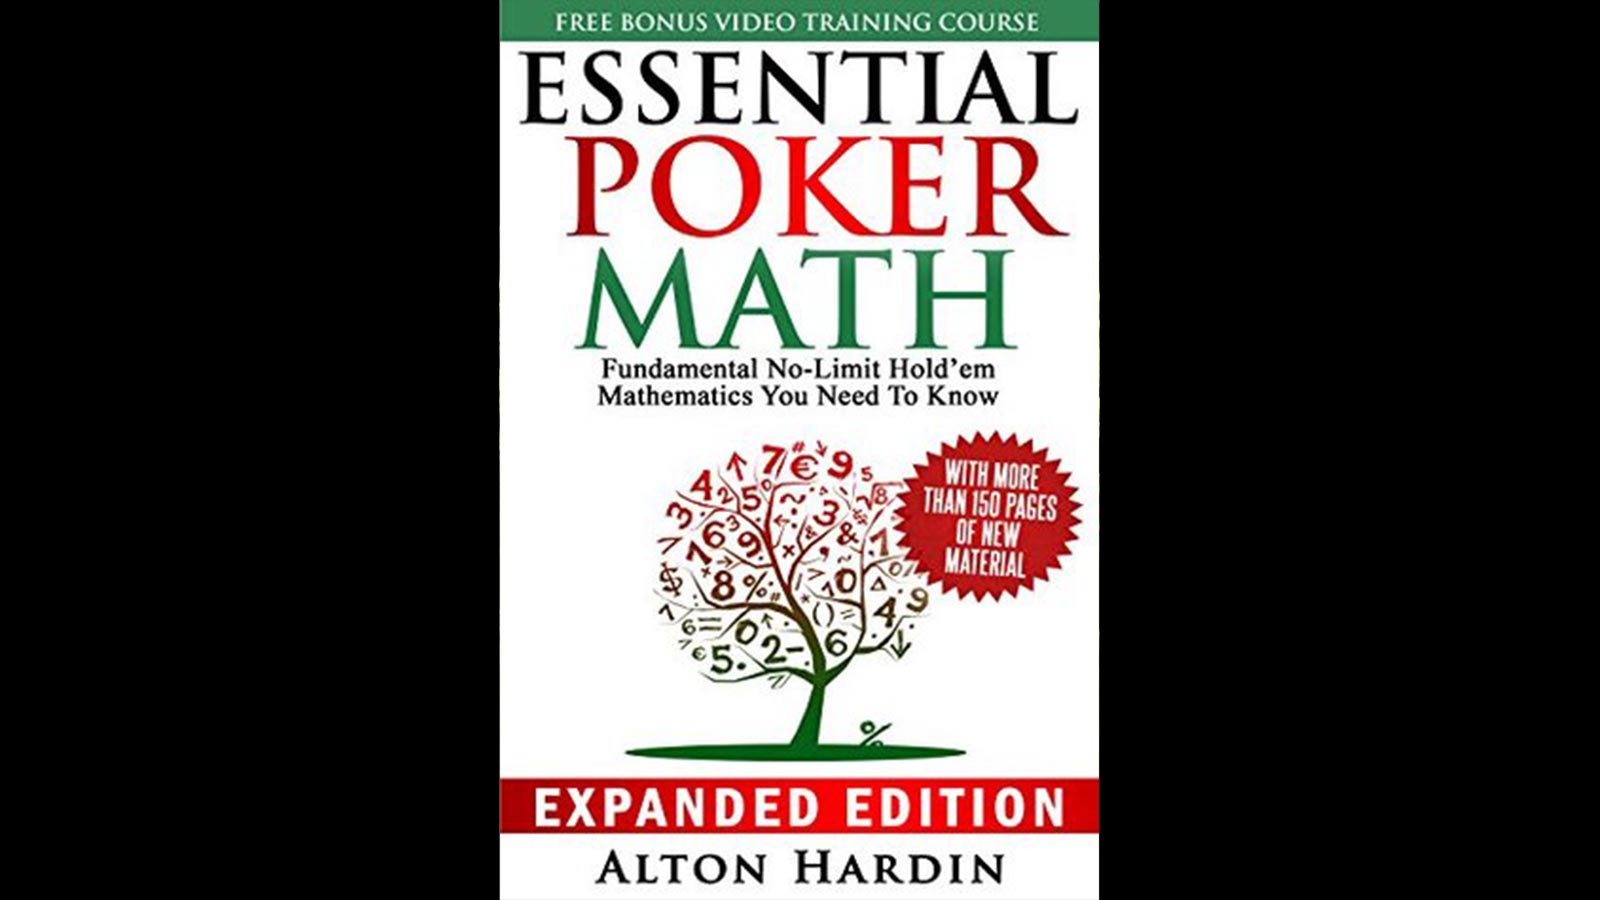 Essential Poker Math, Expanded Edition Fundamental No-Limit Hold'em Mathematics You Need to Know